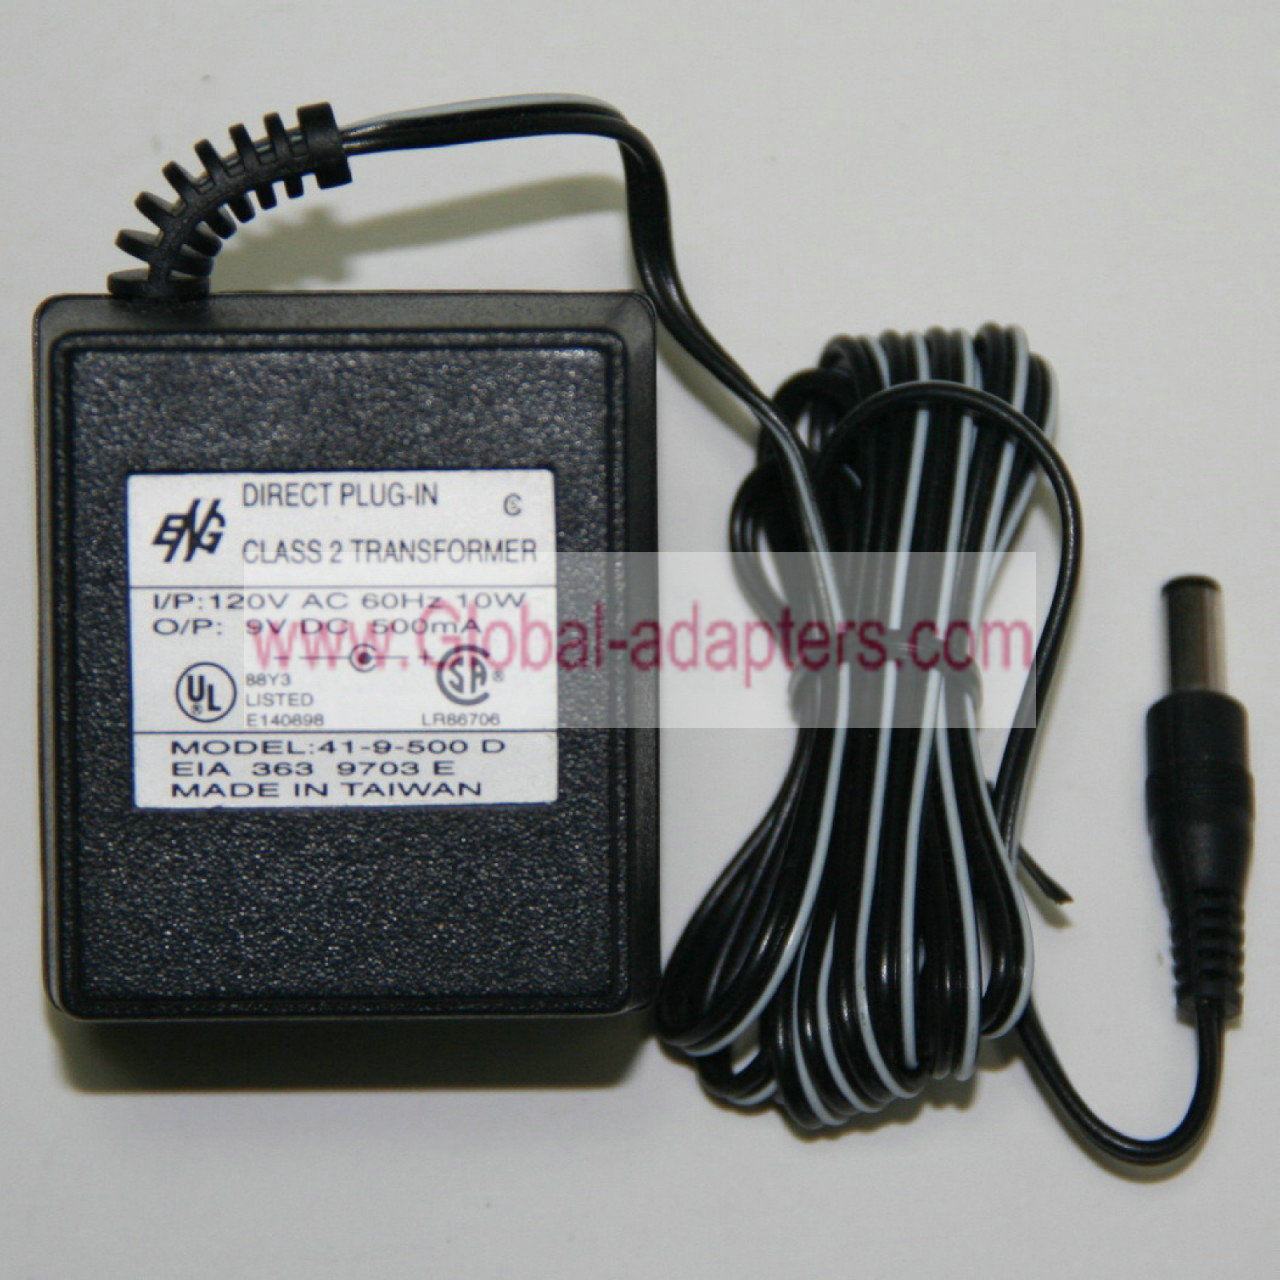 New ENG 9VDC 500mA 41-9-500D Power Adapter for some mixers 9vDC - Click Image to Close